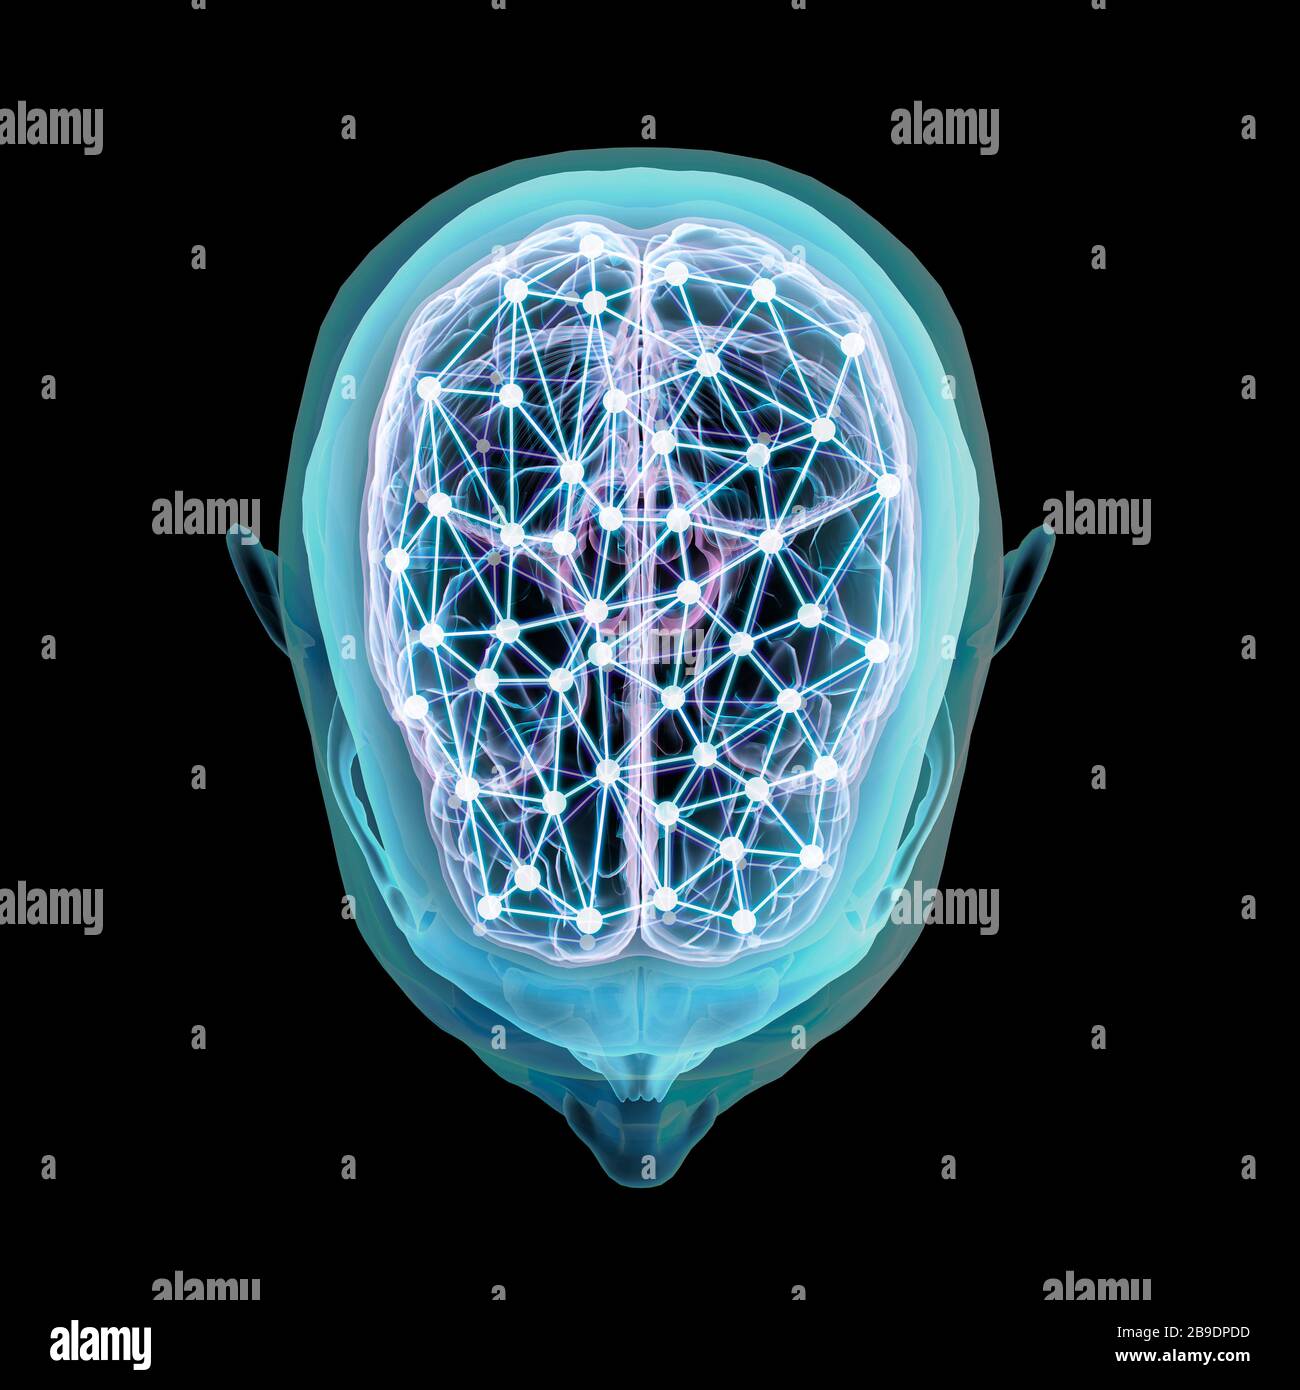 Human head and brain with network nodes, top view on black background. Stock Photo